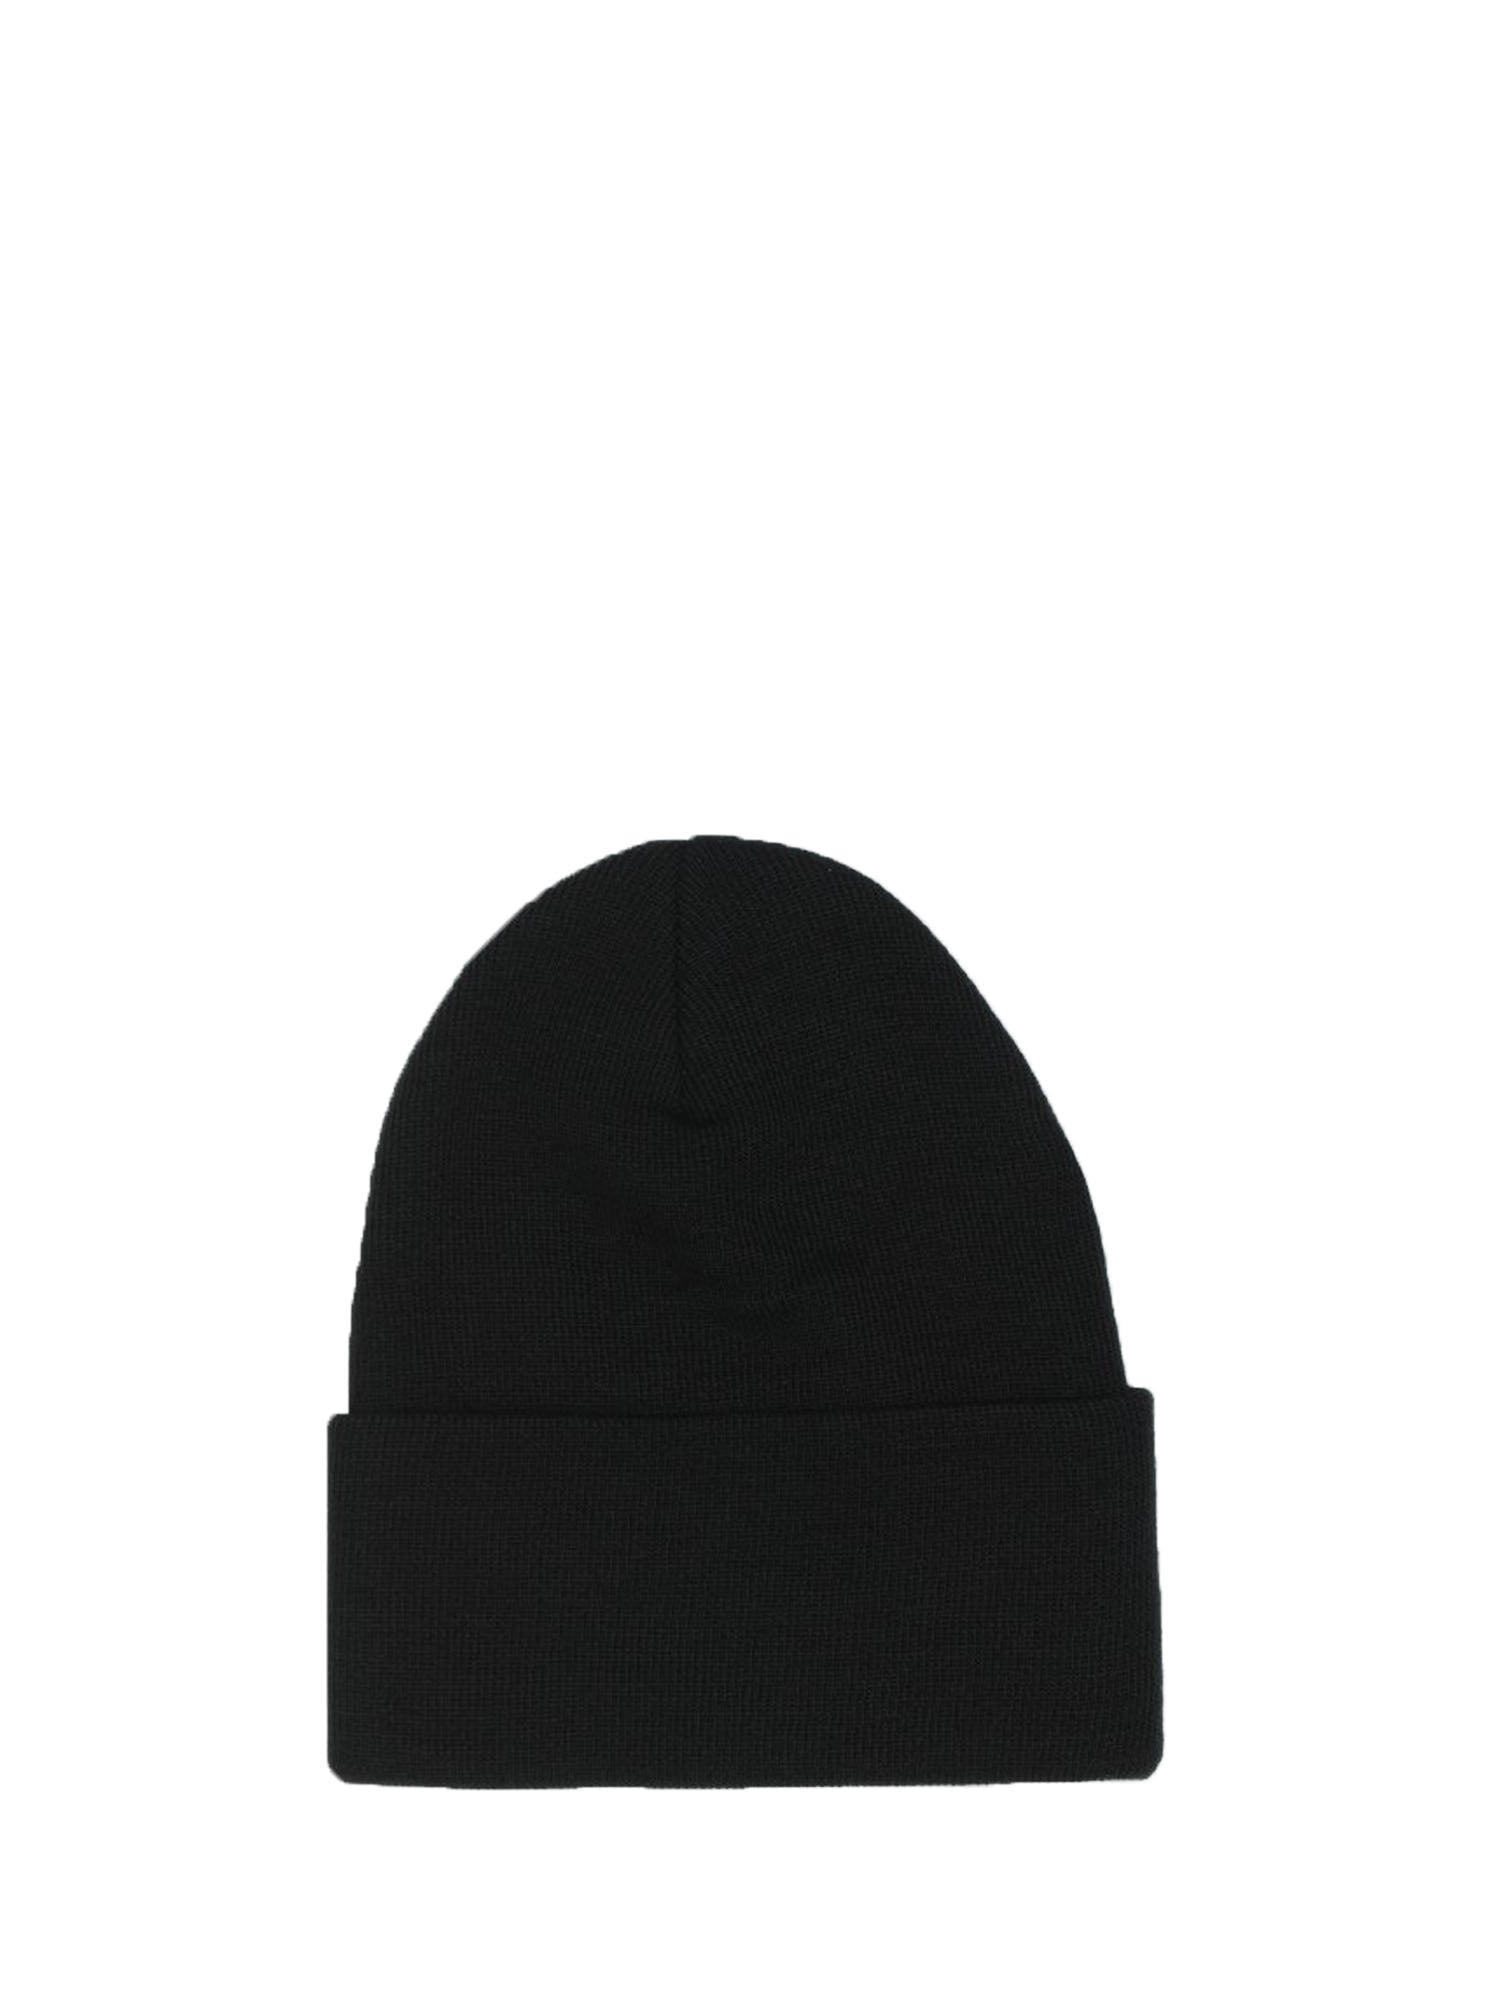 LEVI'S CAPPELLO SLOUCHY RED TAB NERO